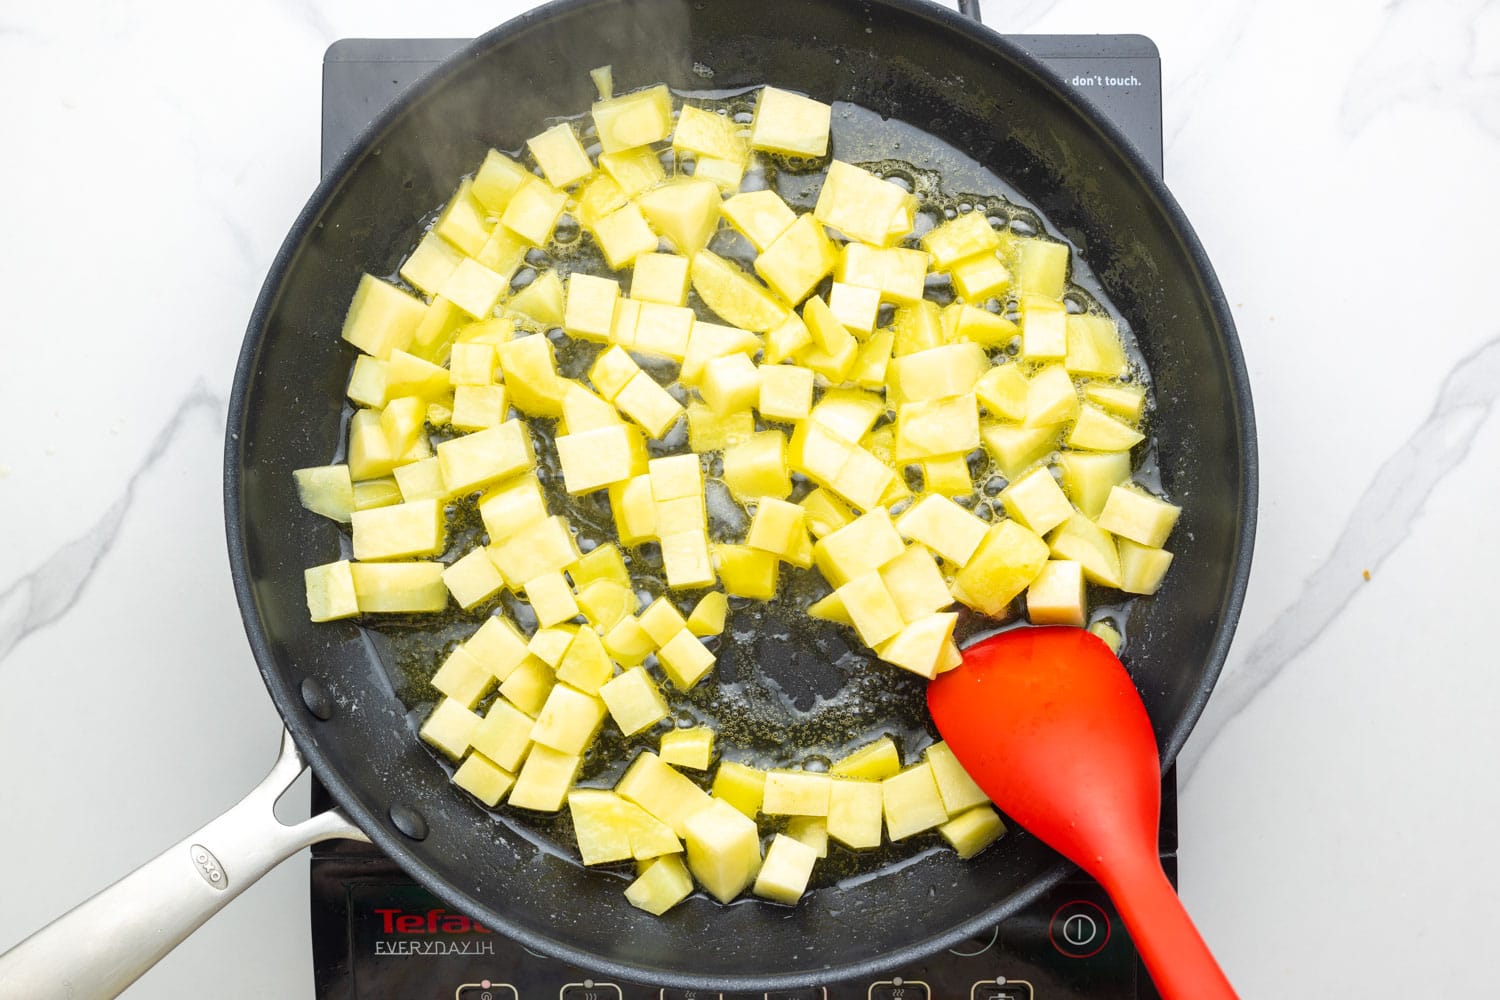 diced potatoes in a non stick skillet with oil, stirred with a red spoon.